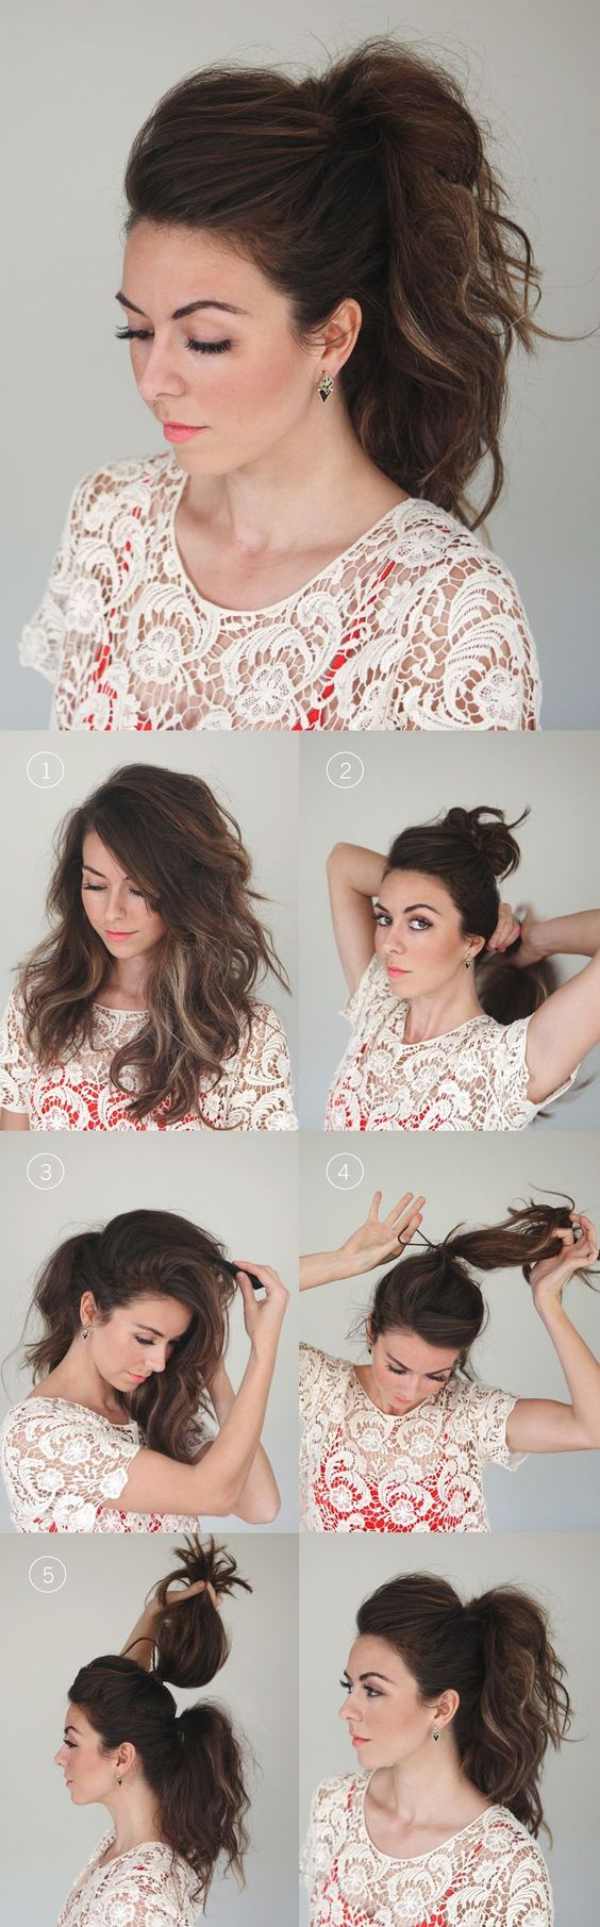 Hairstyles That Can be Done in 3 Minutes